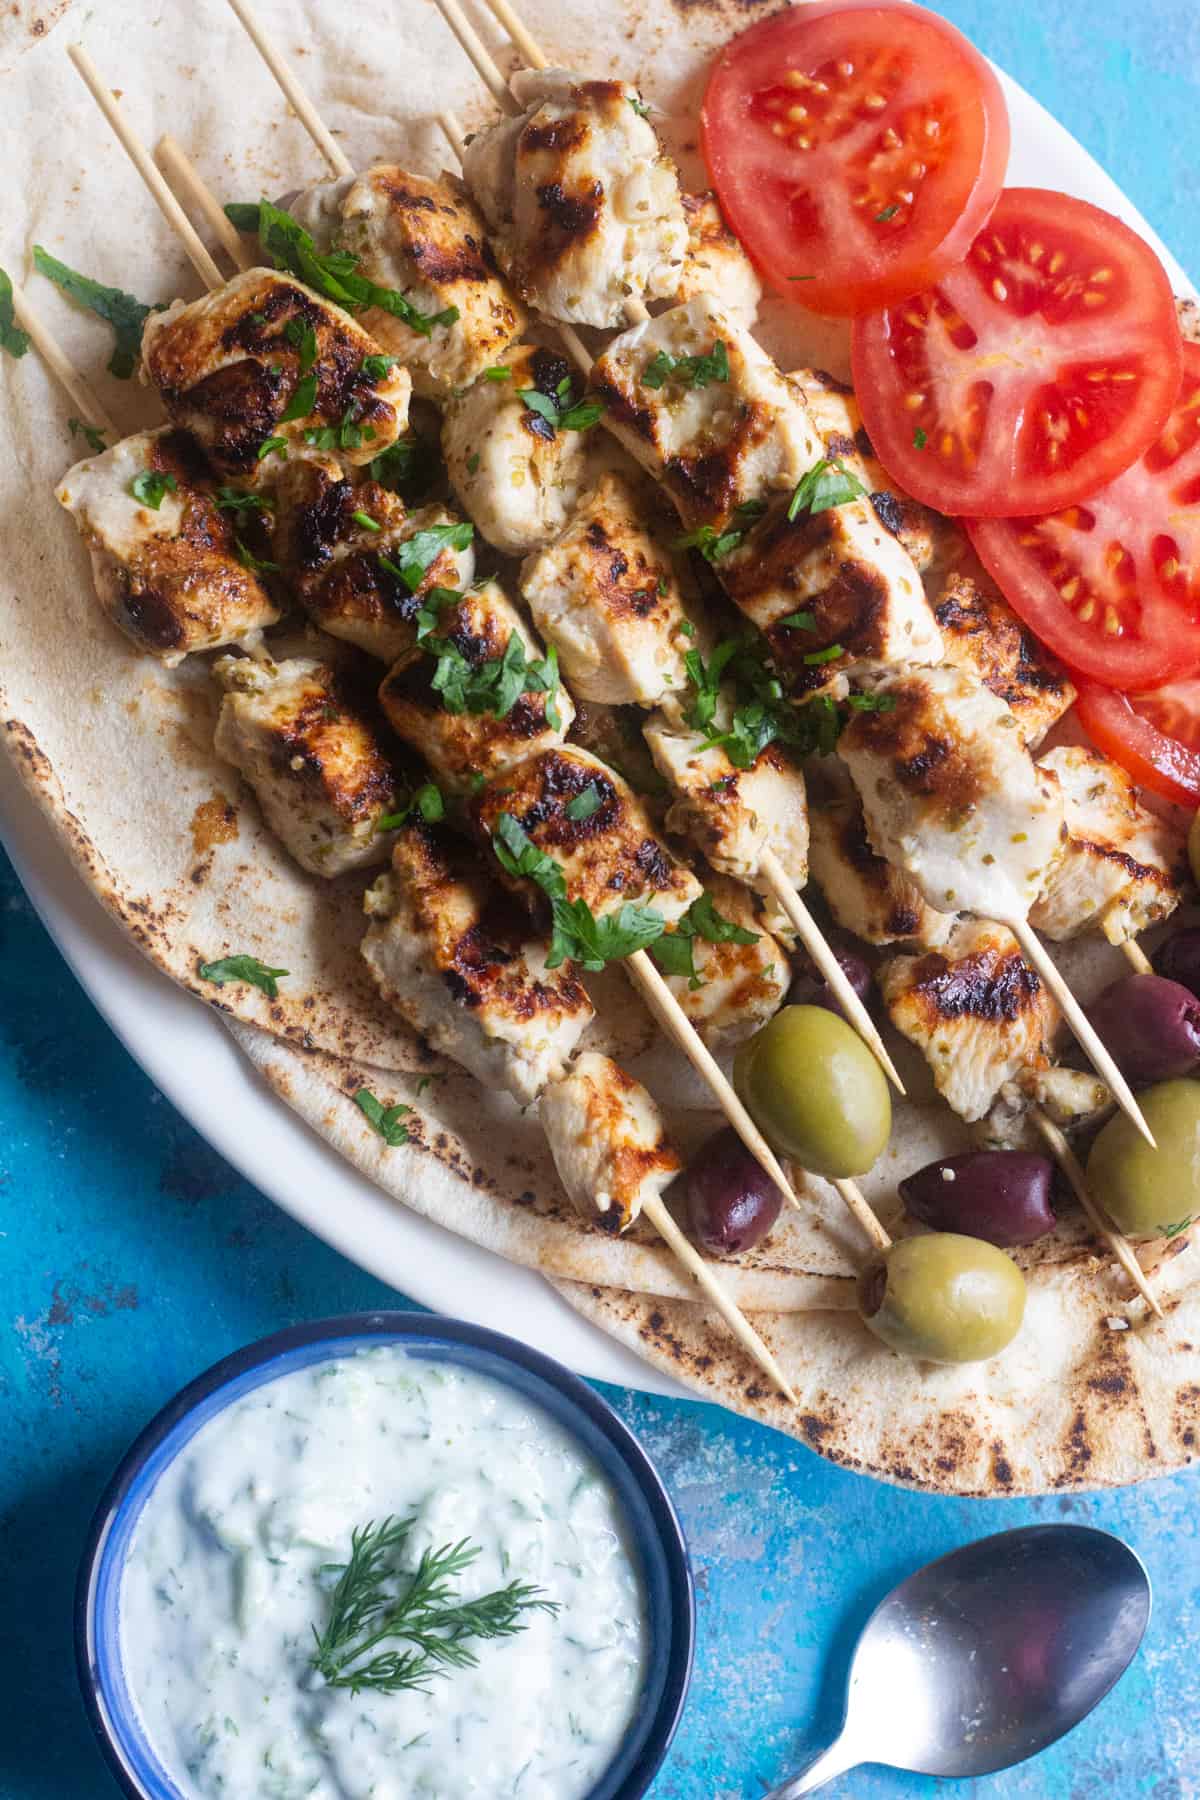 A delicious recipe for homemade chicken souvlaki made with an easy marinade and all the pita fixings. This Greek street food is packed with amazing flavors and is served with creamy tzatziki sauce. 